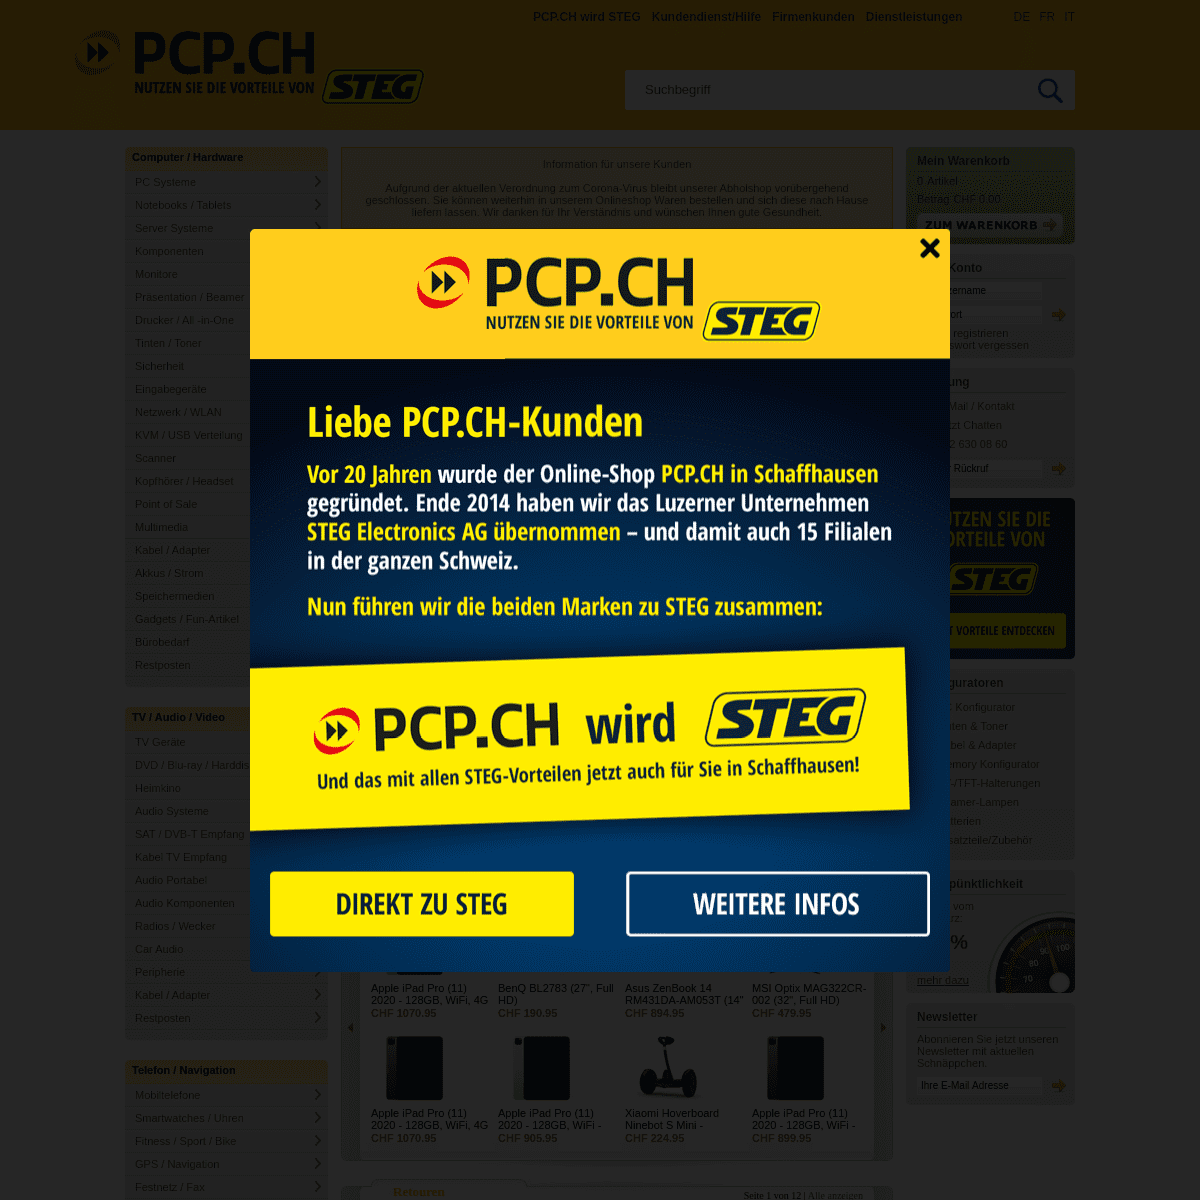 A complete backup of pcp.ch